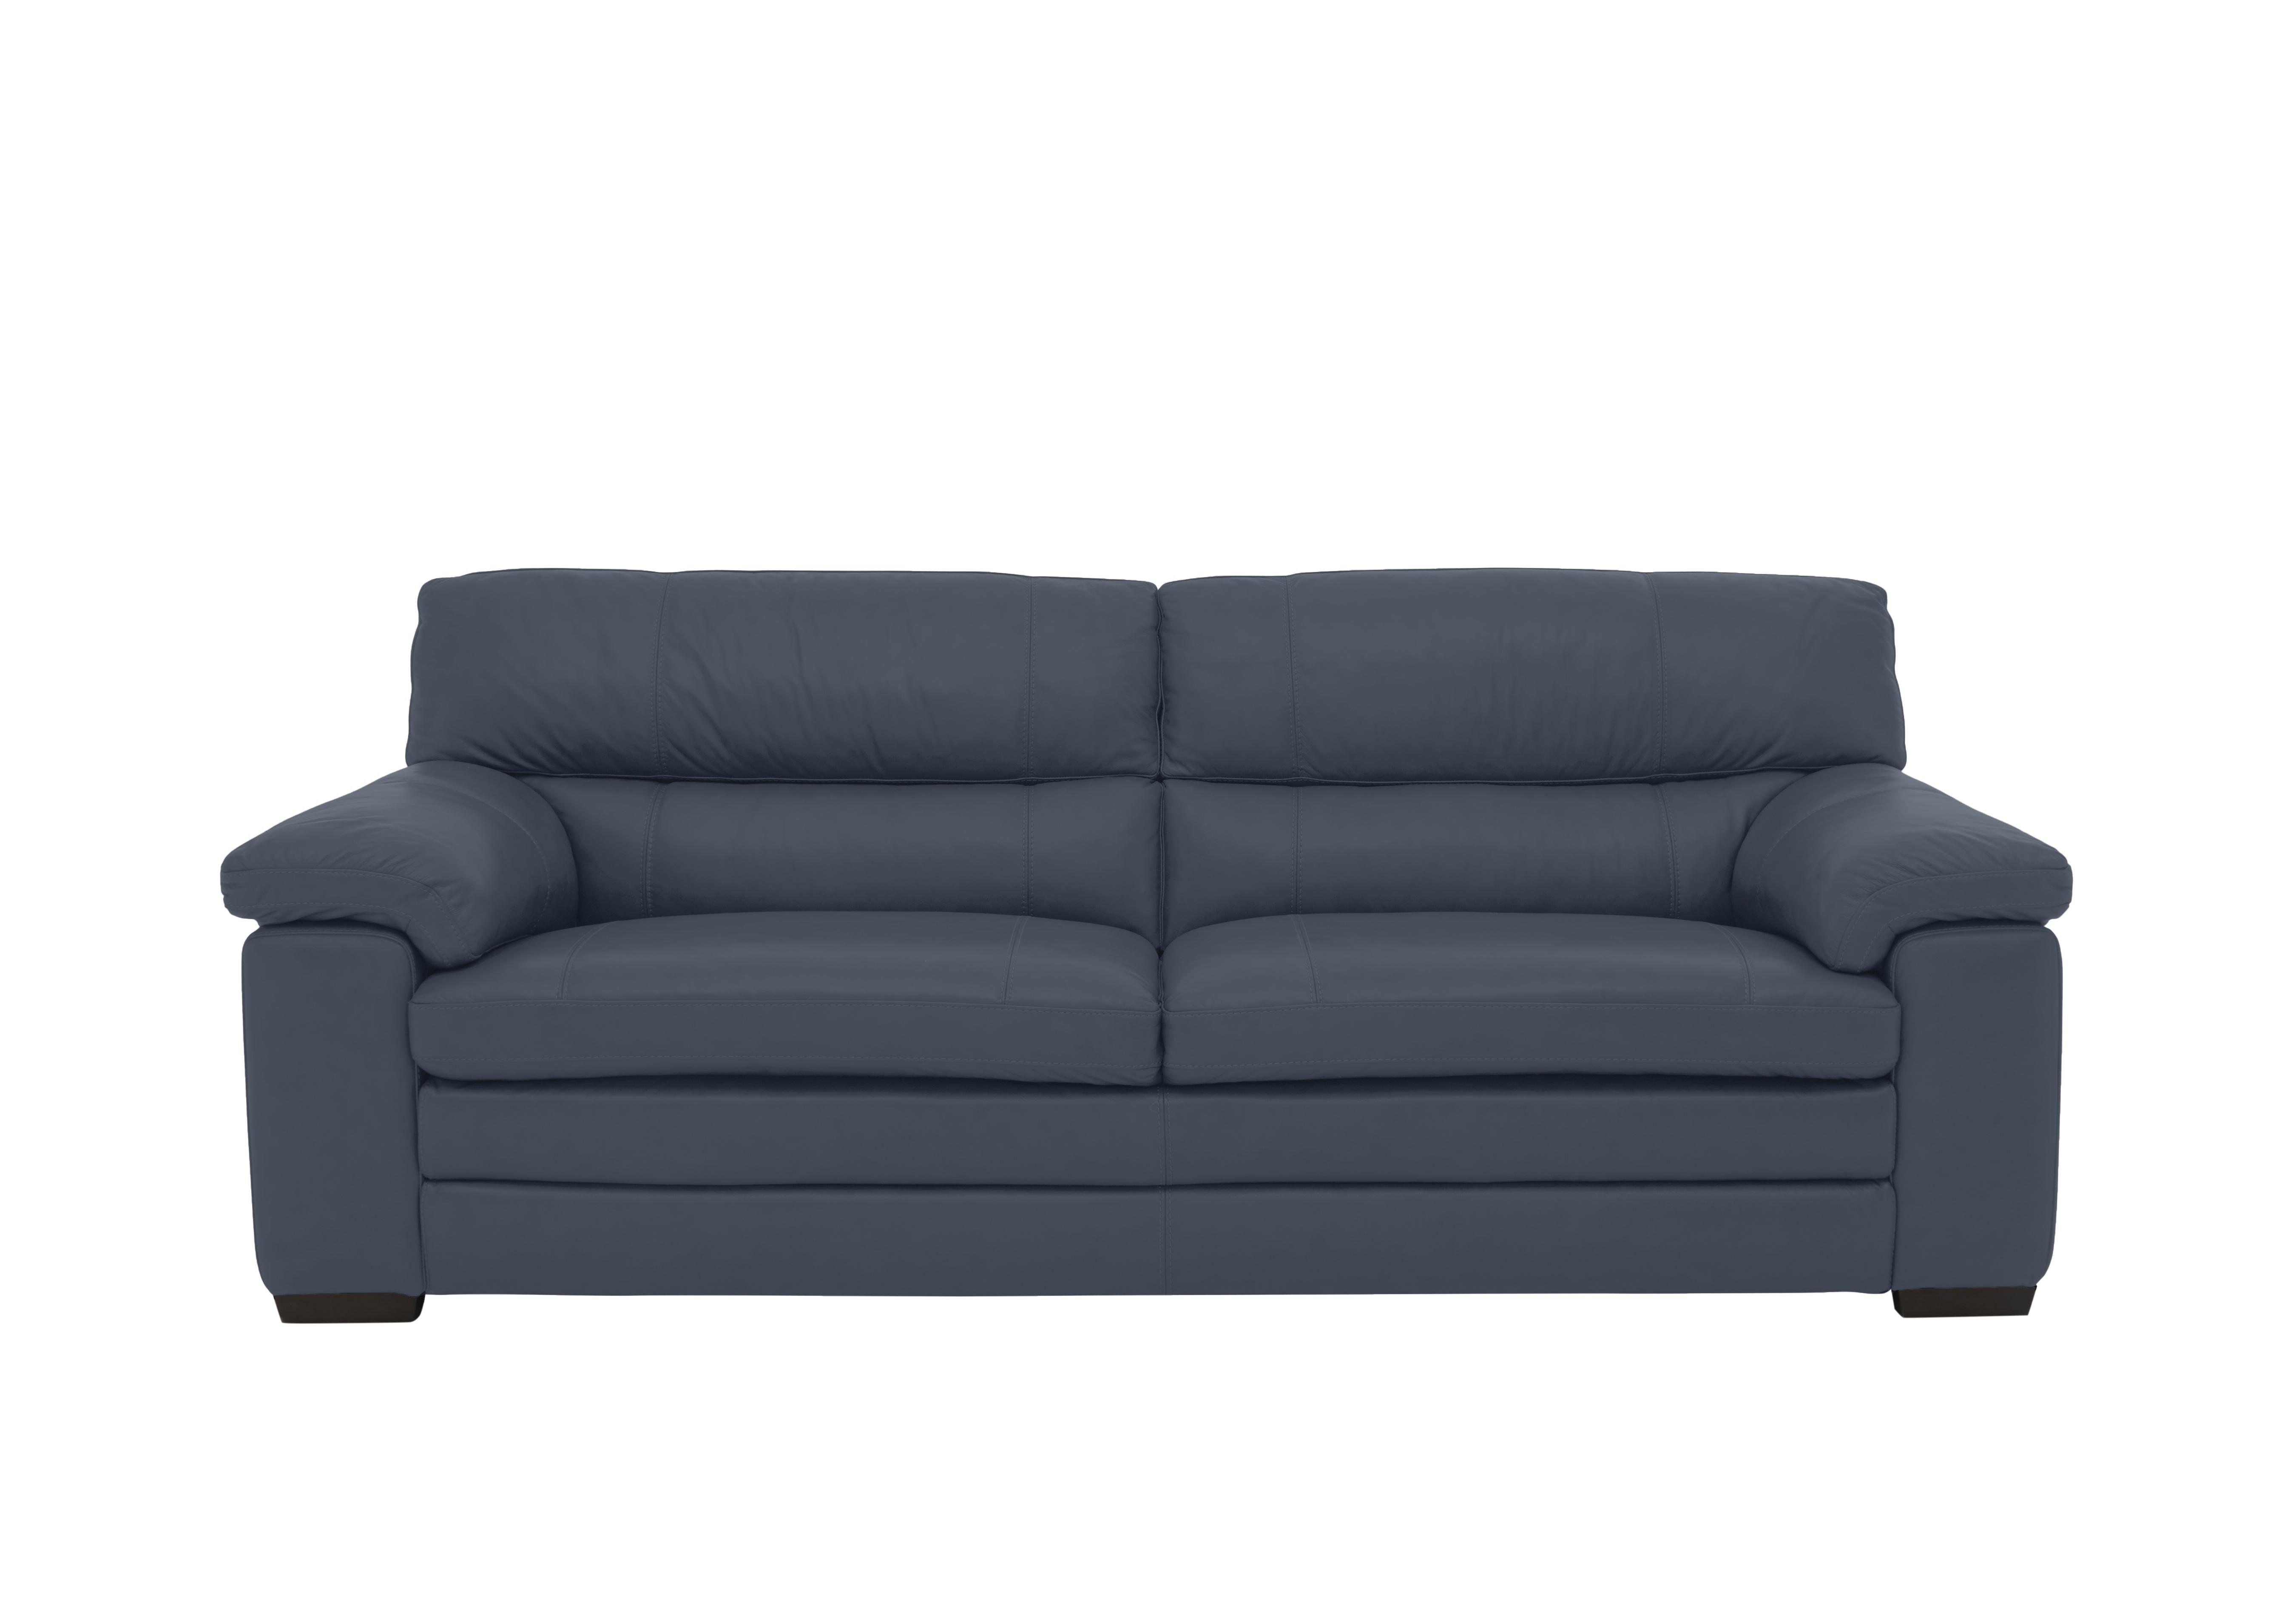 Cozee 3 Seater Pure Premium Leather Sofa in Bv-313e Ocean Blue on Furniture Village